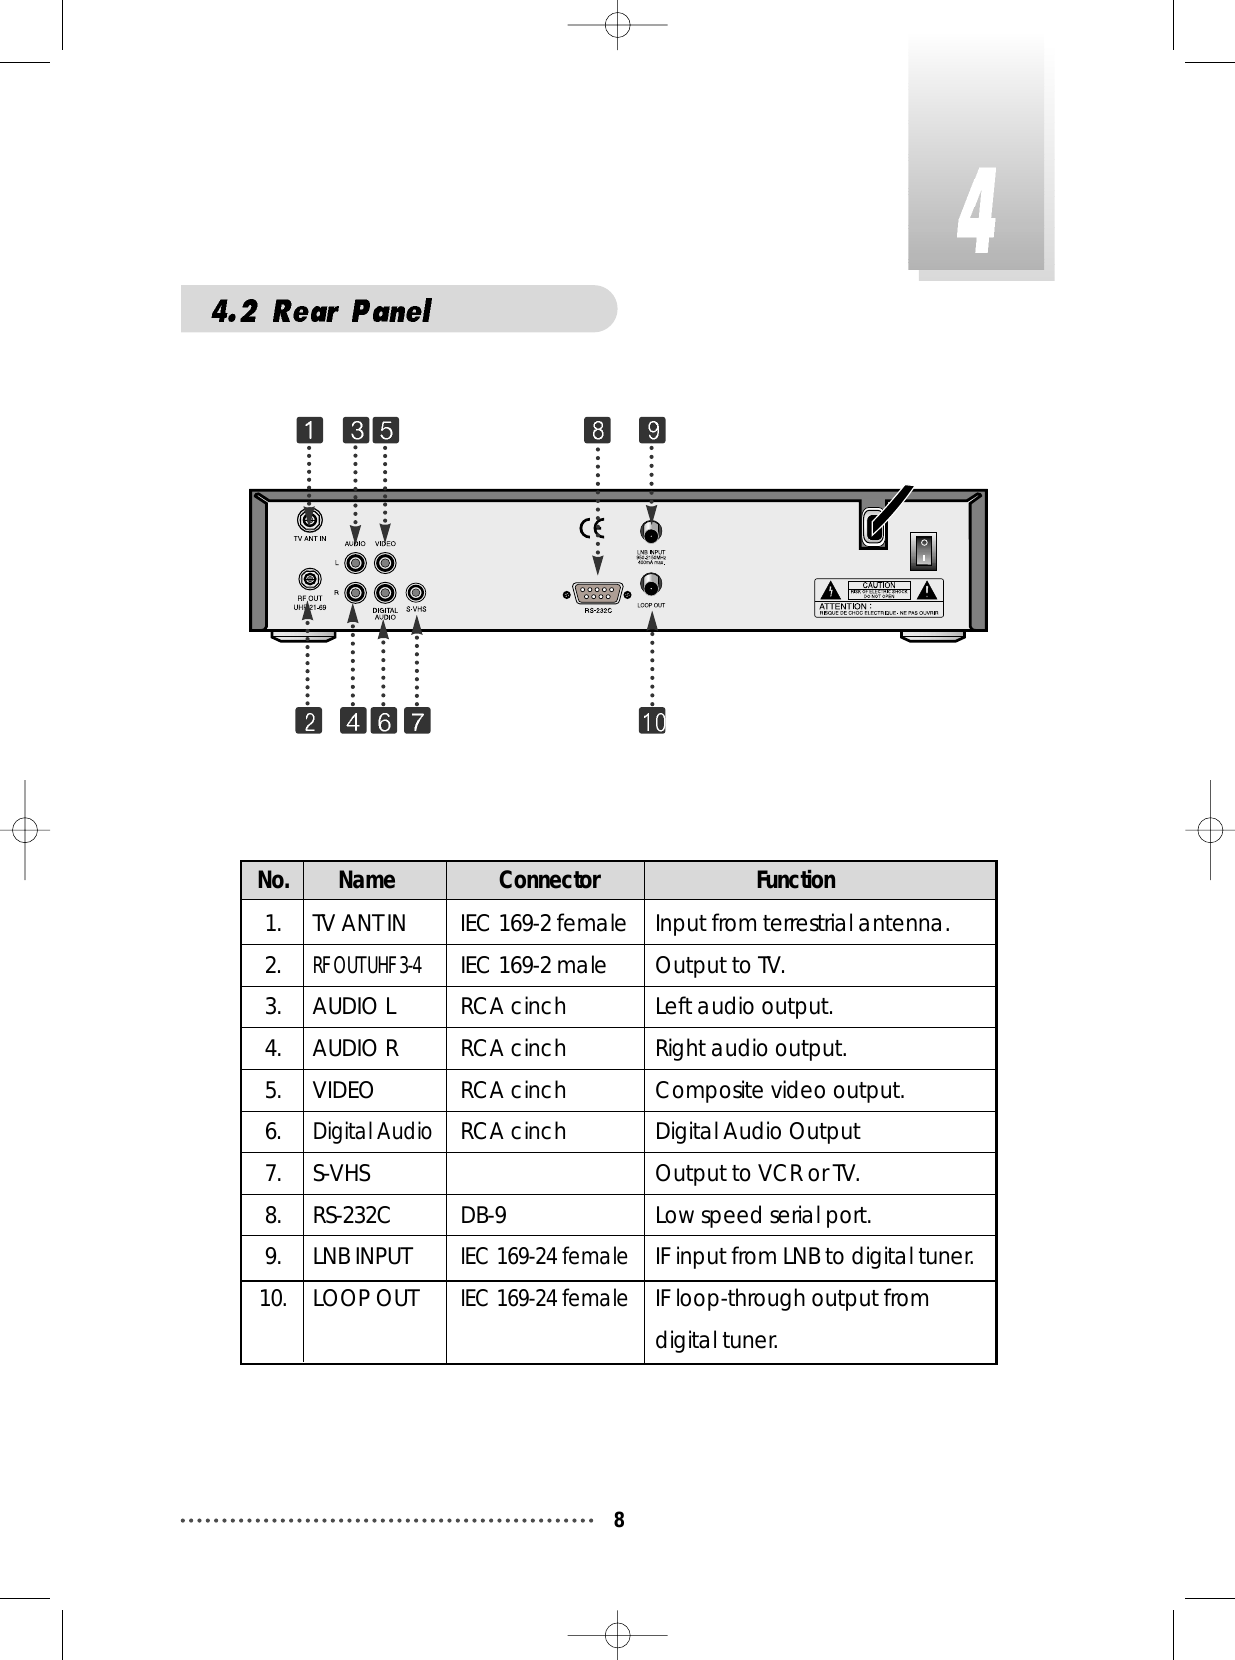 8No. Name Connector Function1. TV ANT IN IEC 169-2 female Input from terrestrial antenna.2.RF OUT UHF 3-4IEC 169-2 male Output to TV.3. AUDIO L RCA cinch Left audio output.4. AUDIO R  RCA cinch Right audio output.5. VIDEO  RCA cinch Composite video output.6.Digital AudioRCA cinch Digital Audio Output7. S-VHS Output to VCR or TV.8. RS-232C DB-9 Low speed serial port.9. LNB INPUTIEC 169-24 femaleIF input from LNB to digital tuner.10. LOOP OUTIEC 169-24 femaleIF loop-through output fromdigital tuner.